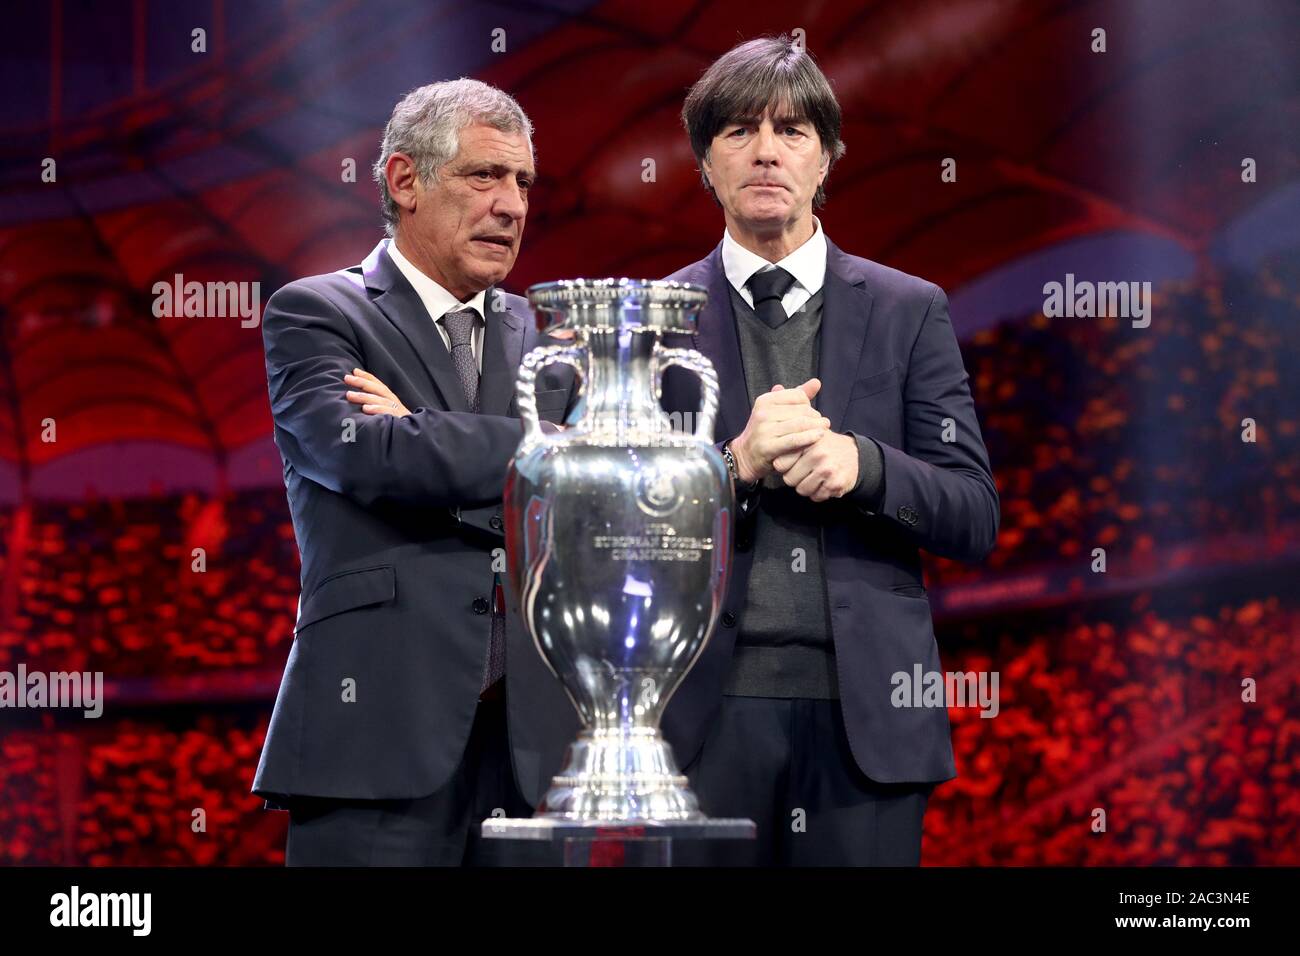 Bukarest, Romania. 30th Nov, 2019. Football, group draw for the European Football Championship 2020 at the Romexpo Exhibition Centre. The coaches of the drawn teams of Group F (Group F) are next to the European Cup: Fernando Santos (l), national coach of Portugal, and Joachim Löw (r), national coach of Germany. UEFA EURO 2020 will take place in twelve countries from 12 June to 12 July 2020. Credit: Christian Charisius/dpa/Alamy Live News Stock Photo